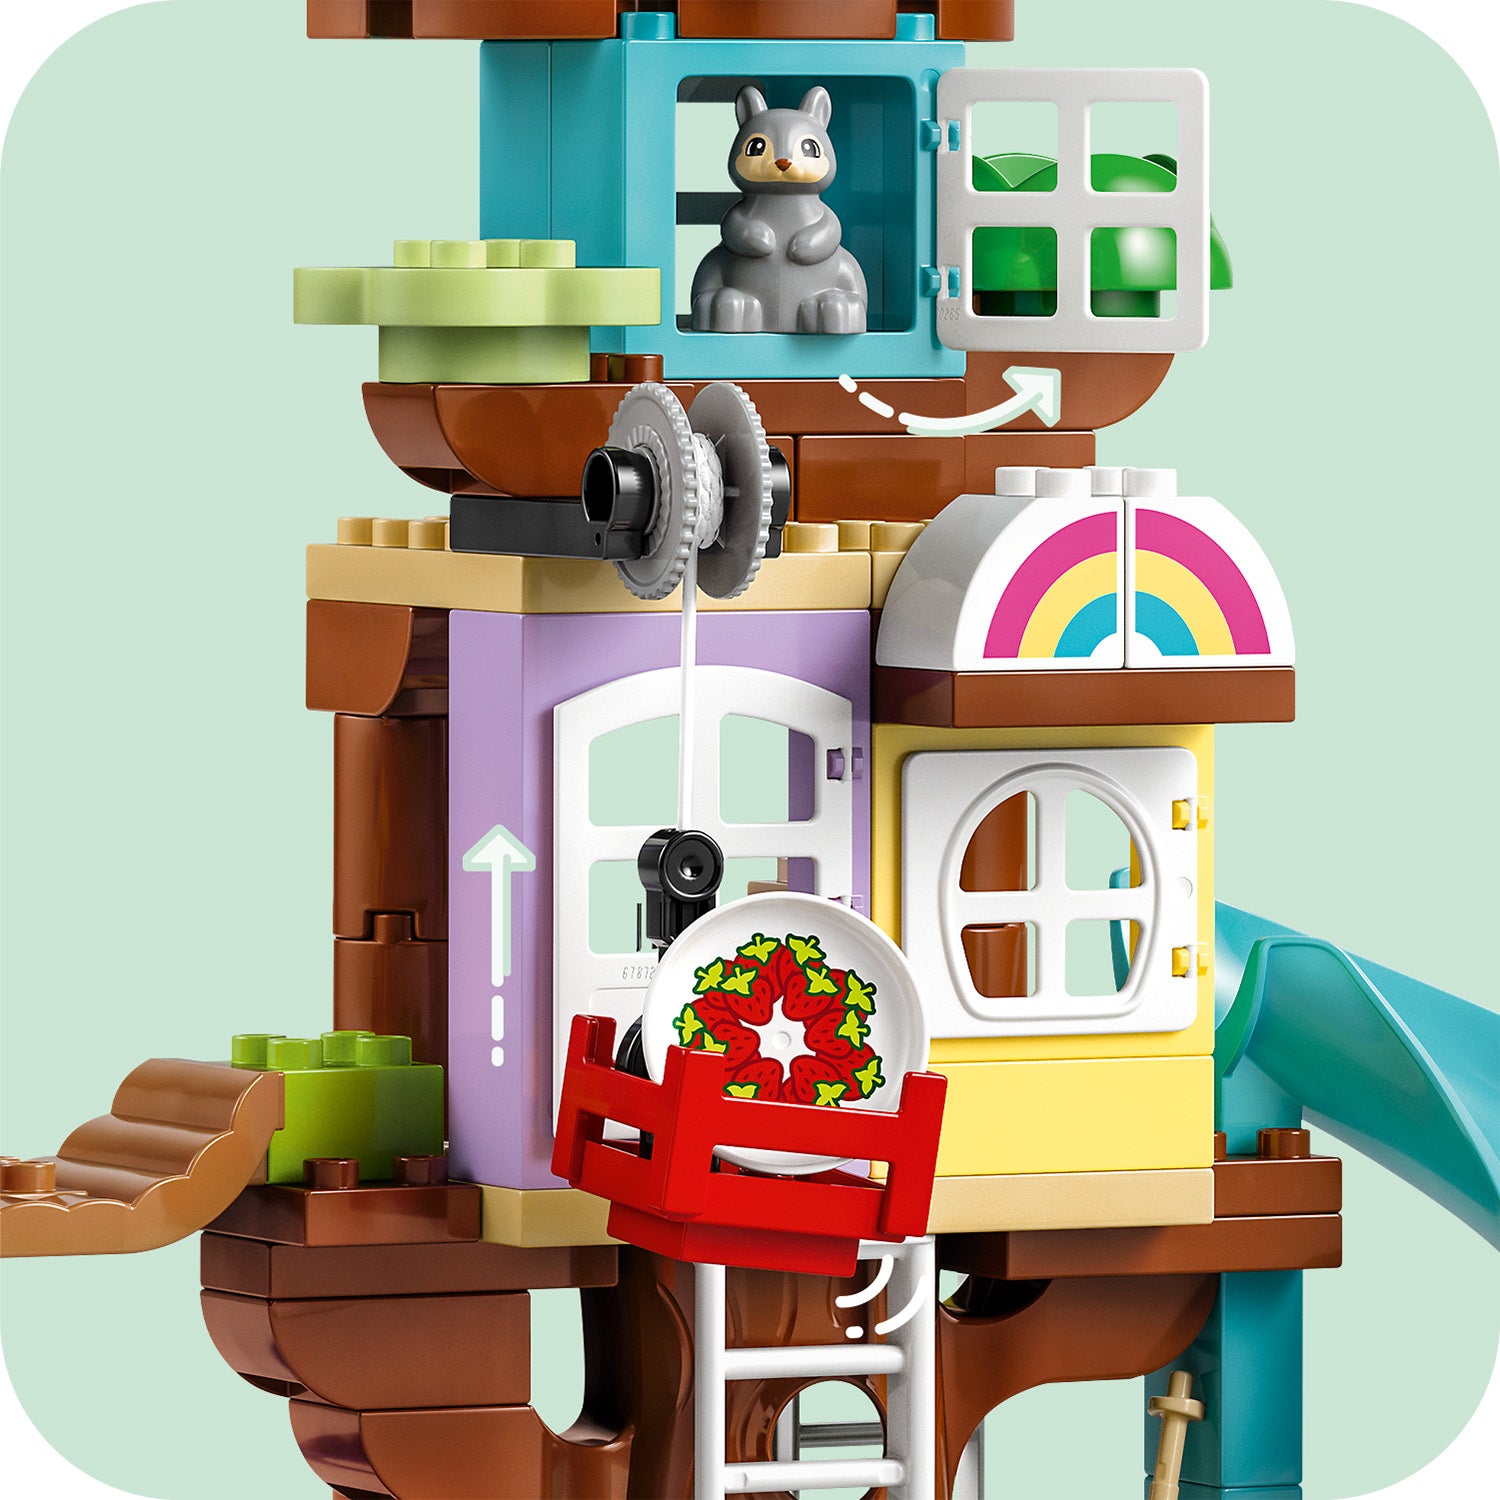 Lego 10993 3in1 Treehouse